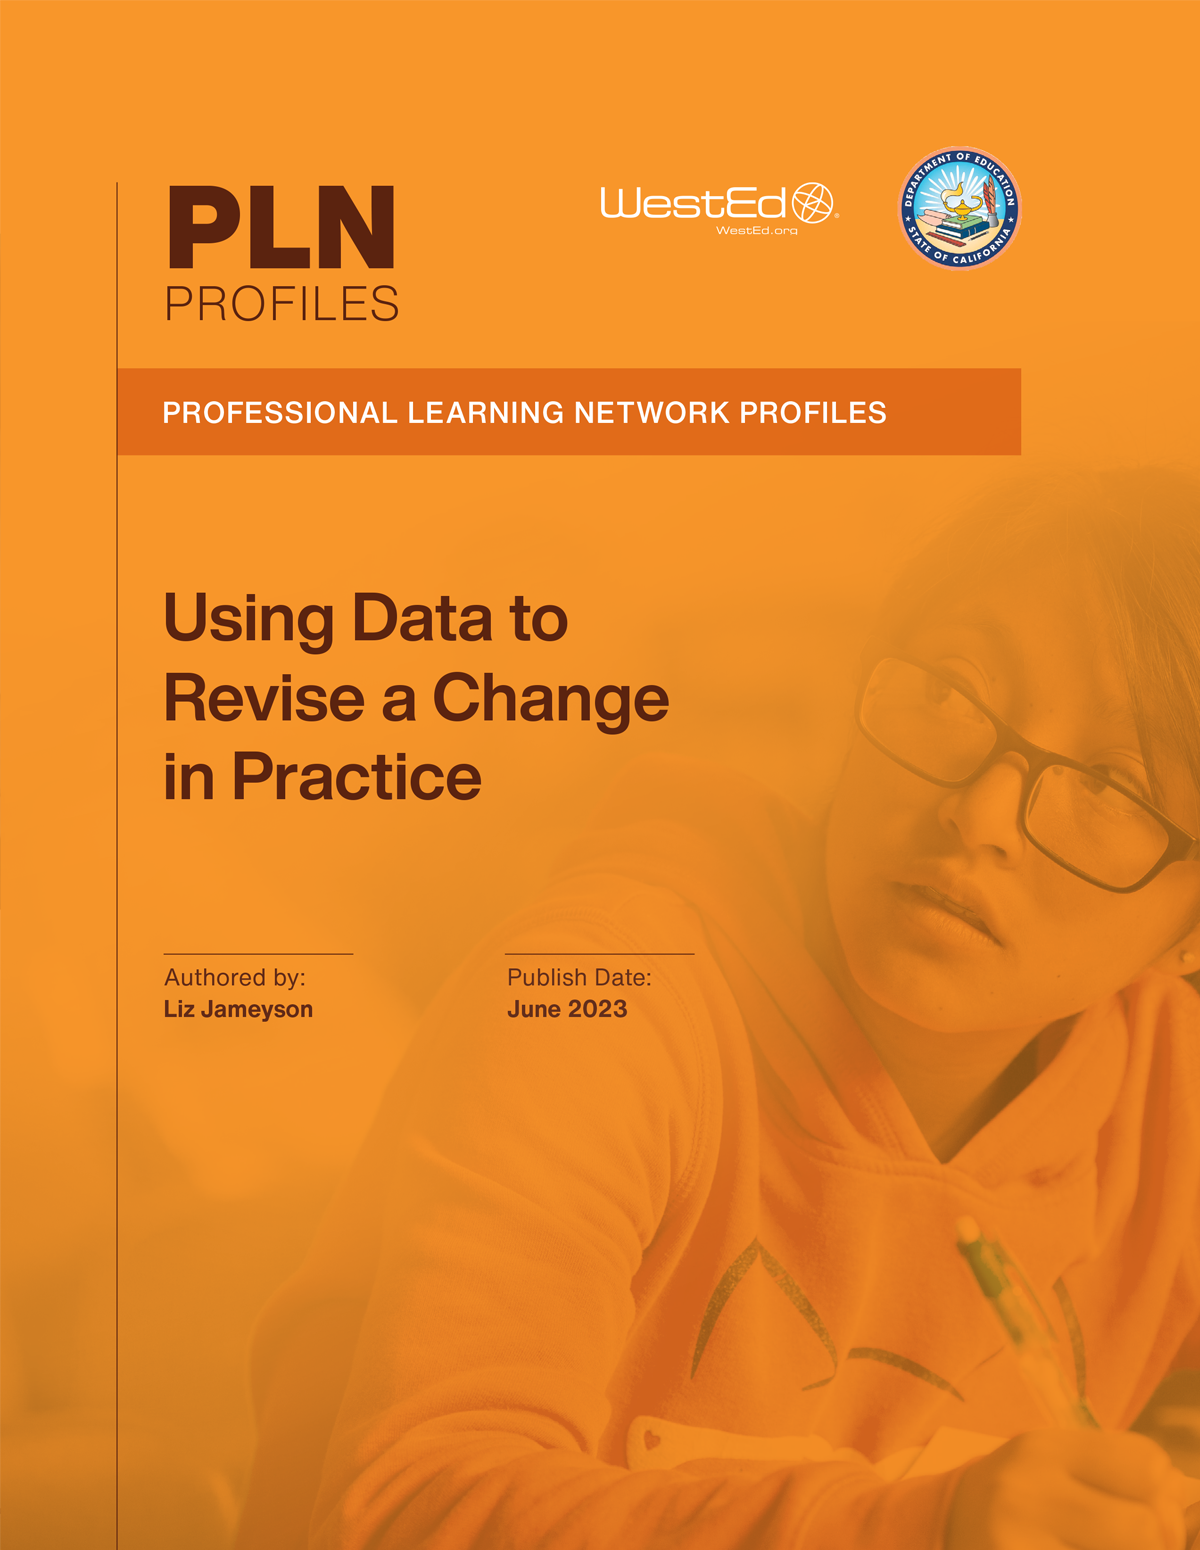 Using Data to Revise a Change in Practice